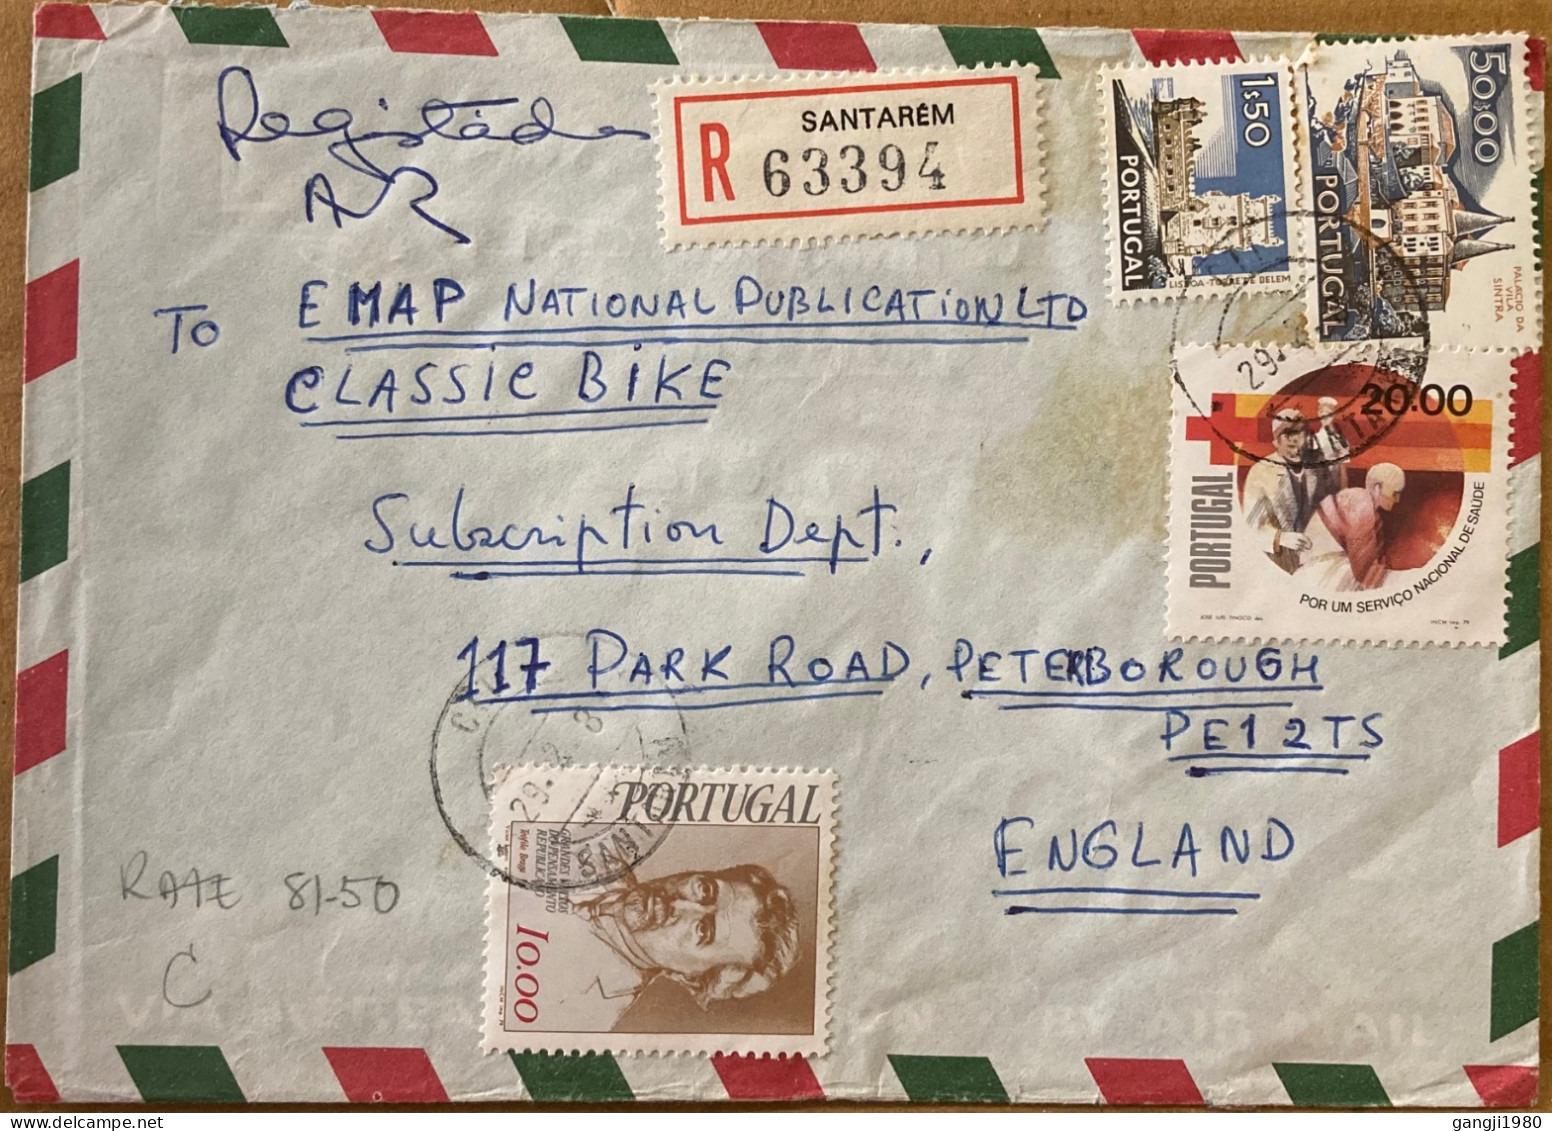 PORTUGAL 1980, REGISTER COVER, USED TO ENGLAND, 4 DIFF STAMP, BUILDING, PATIENT HEALTH SERVICE, TEOFILO BRAGA DOLTOR, SA - Lettres & Documents